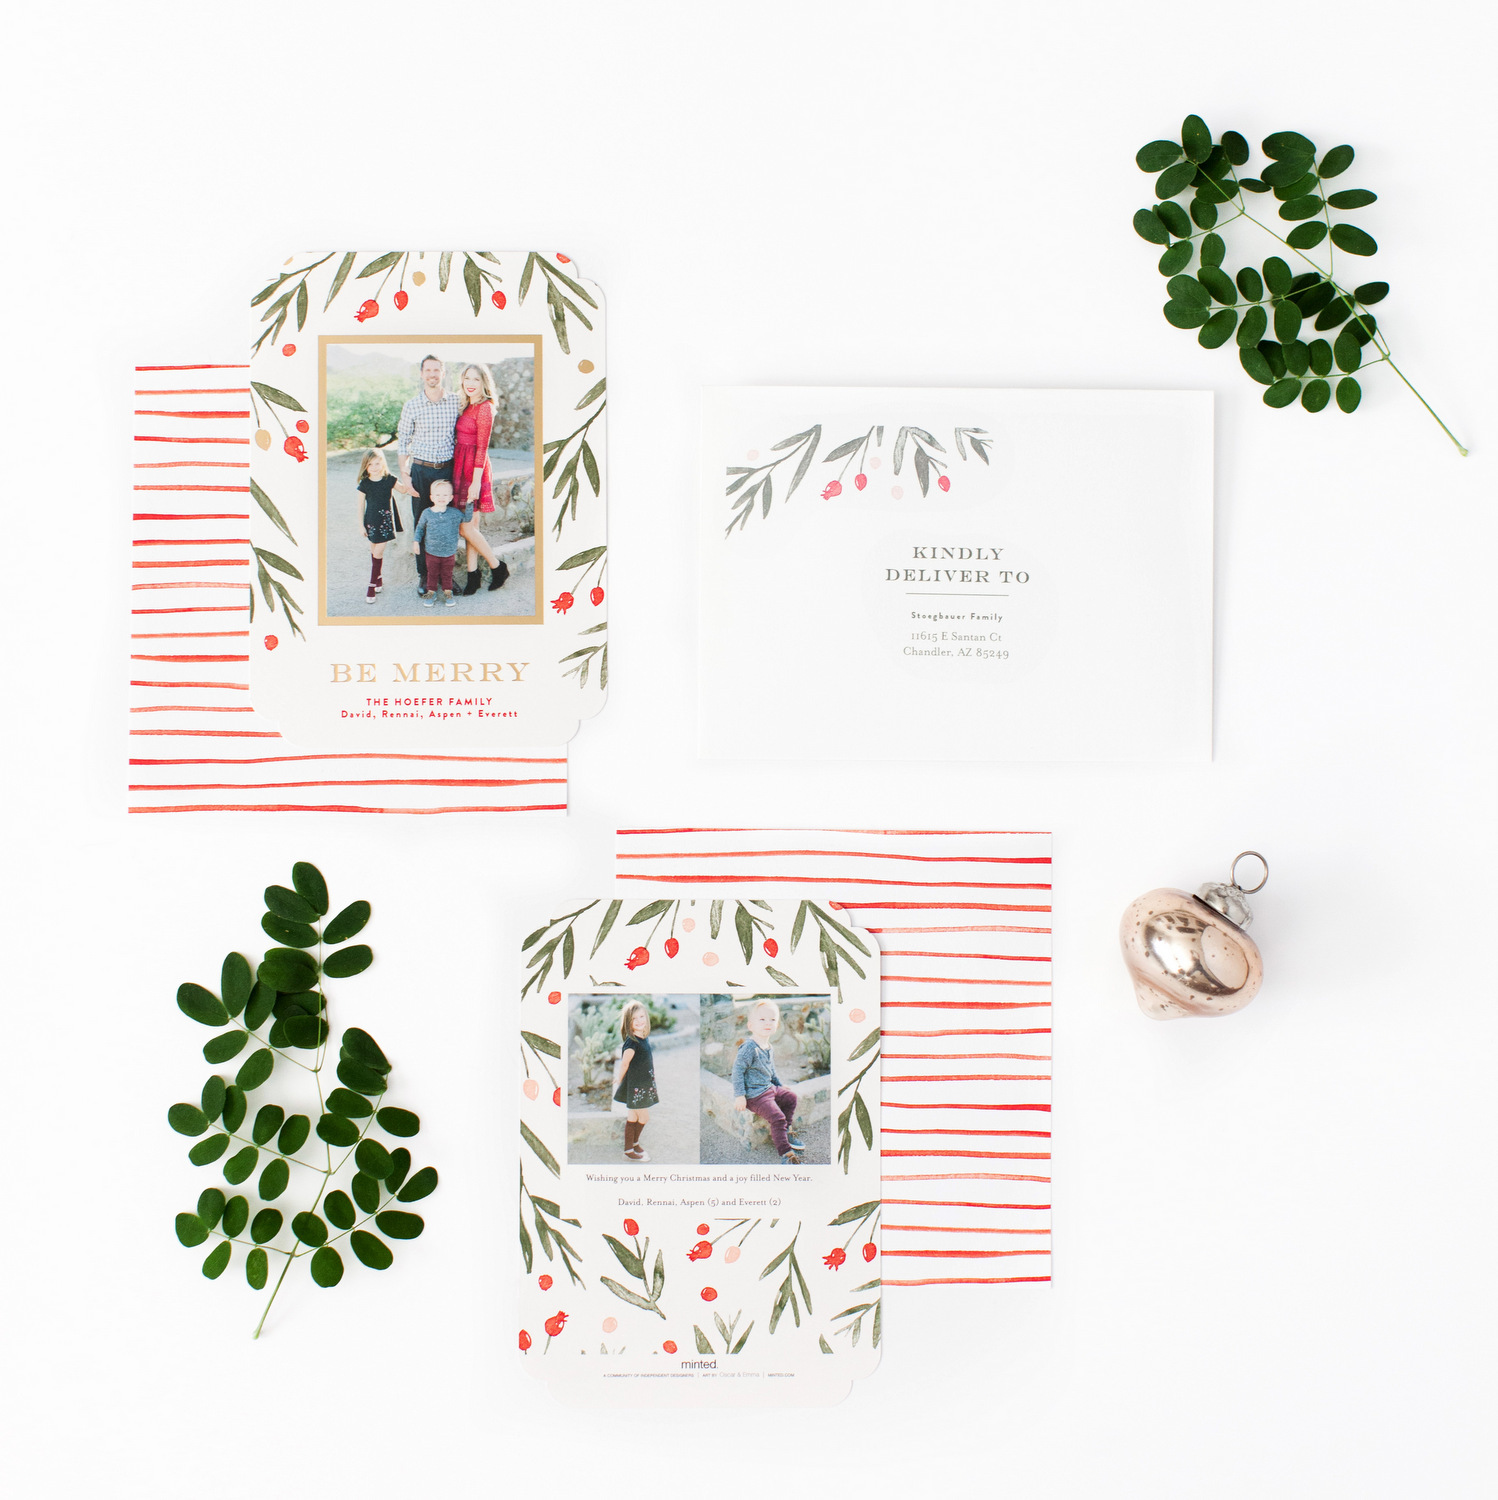 OUR 2016 MINTED CHRISTMAS CARDS + $300 GIVEAWAY!